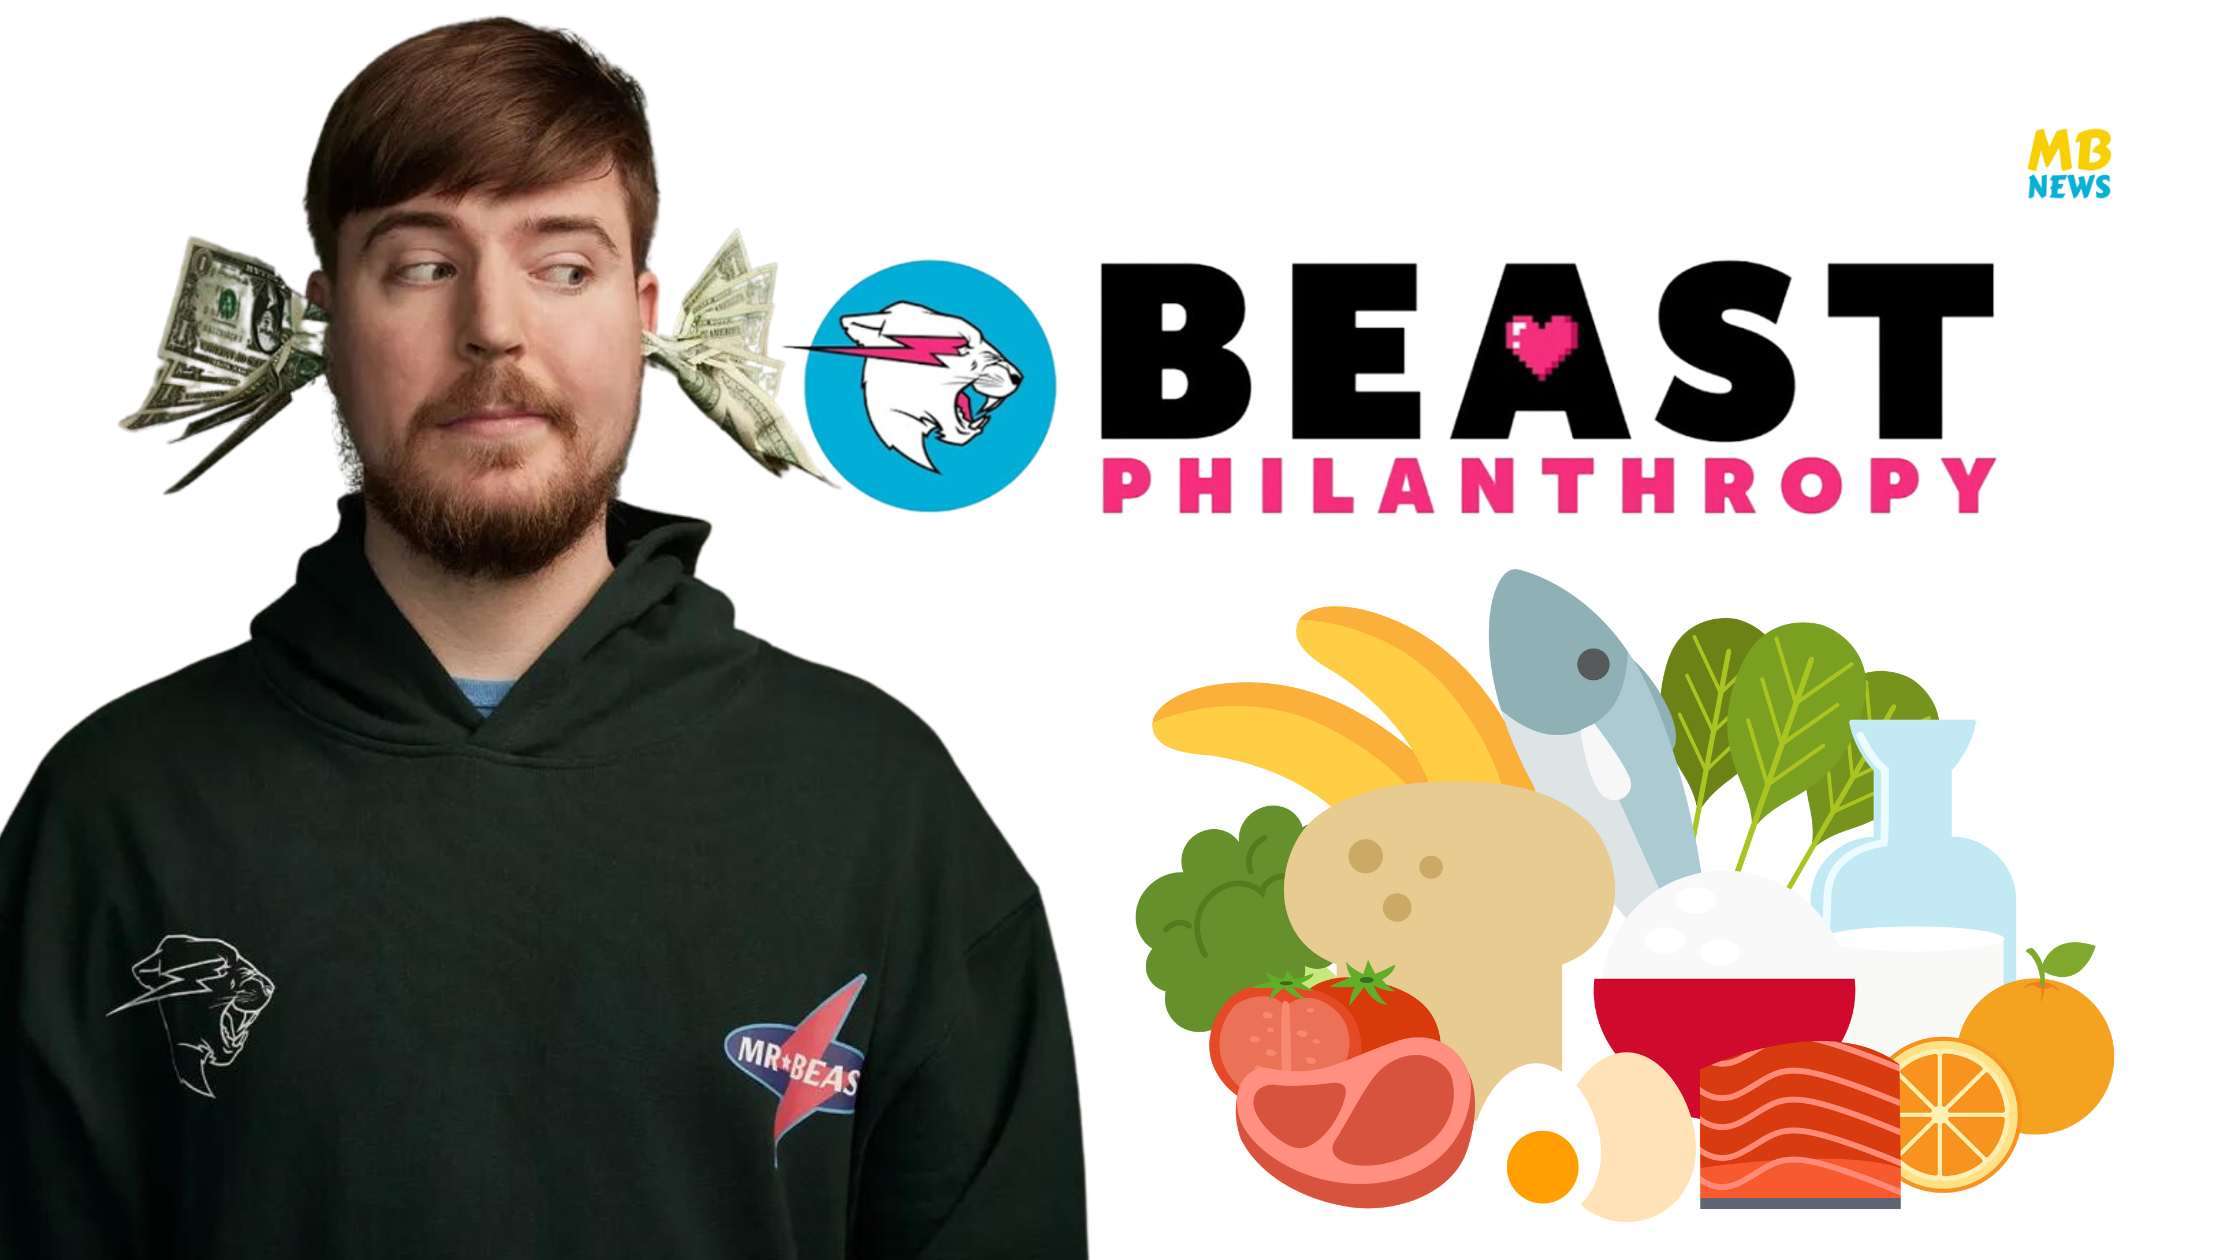 MrBeast's Beast Philanthropy and Sharing Excess Join Forces to Rescue 10 Million Pounds of Food!